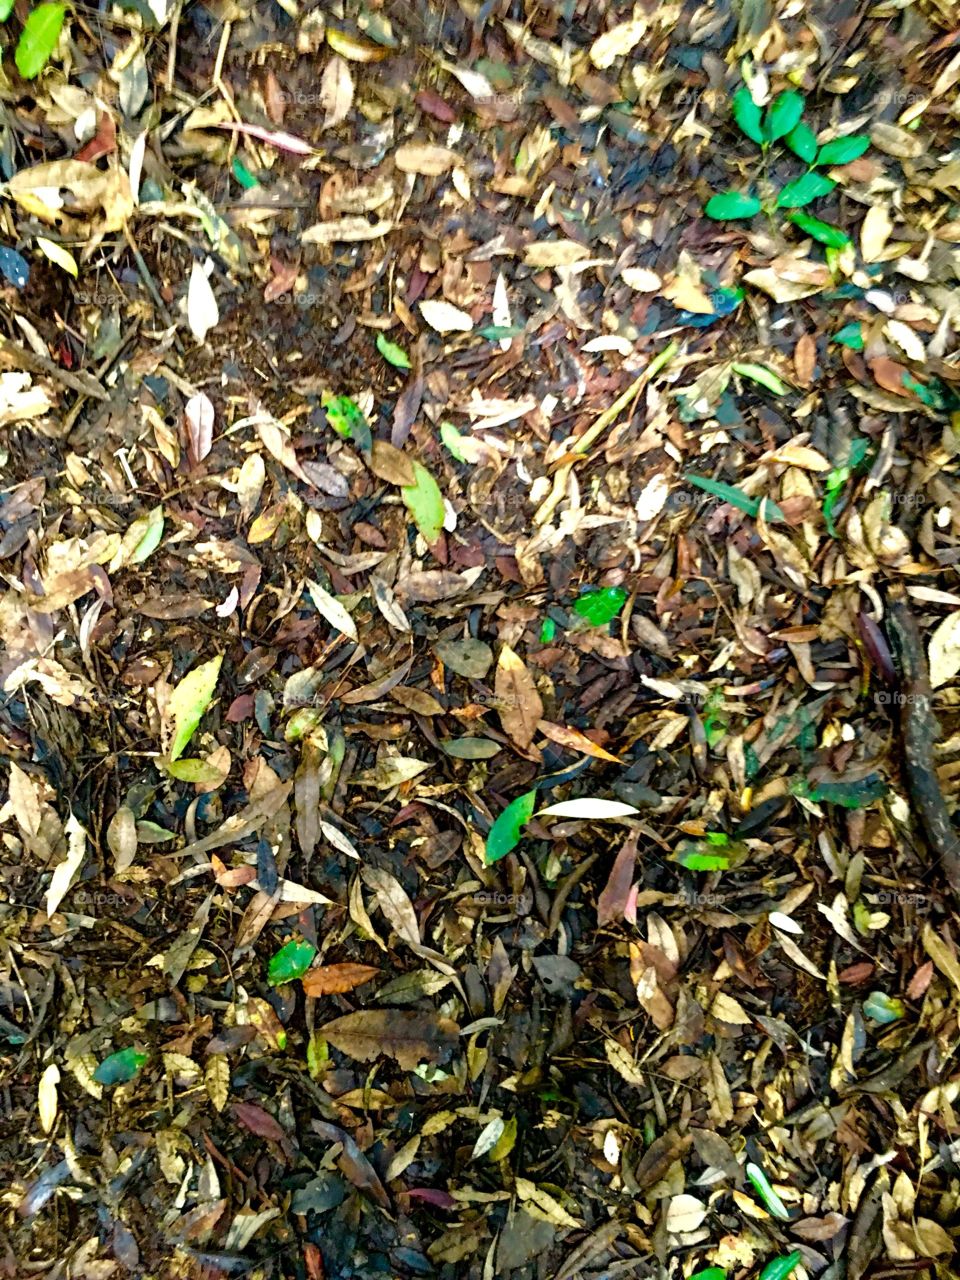 Leaves along the ground